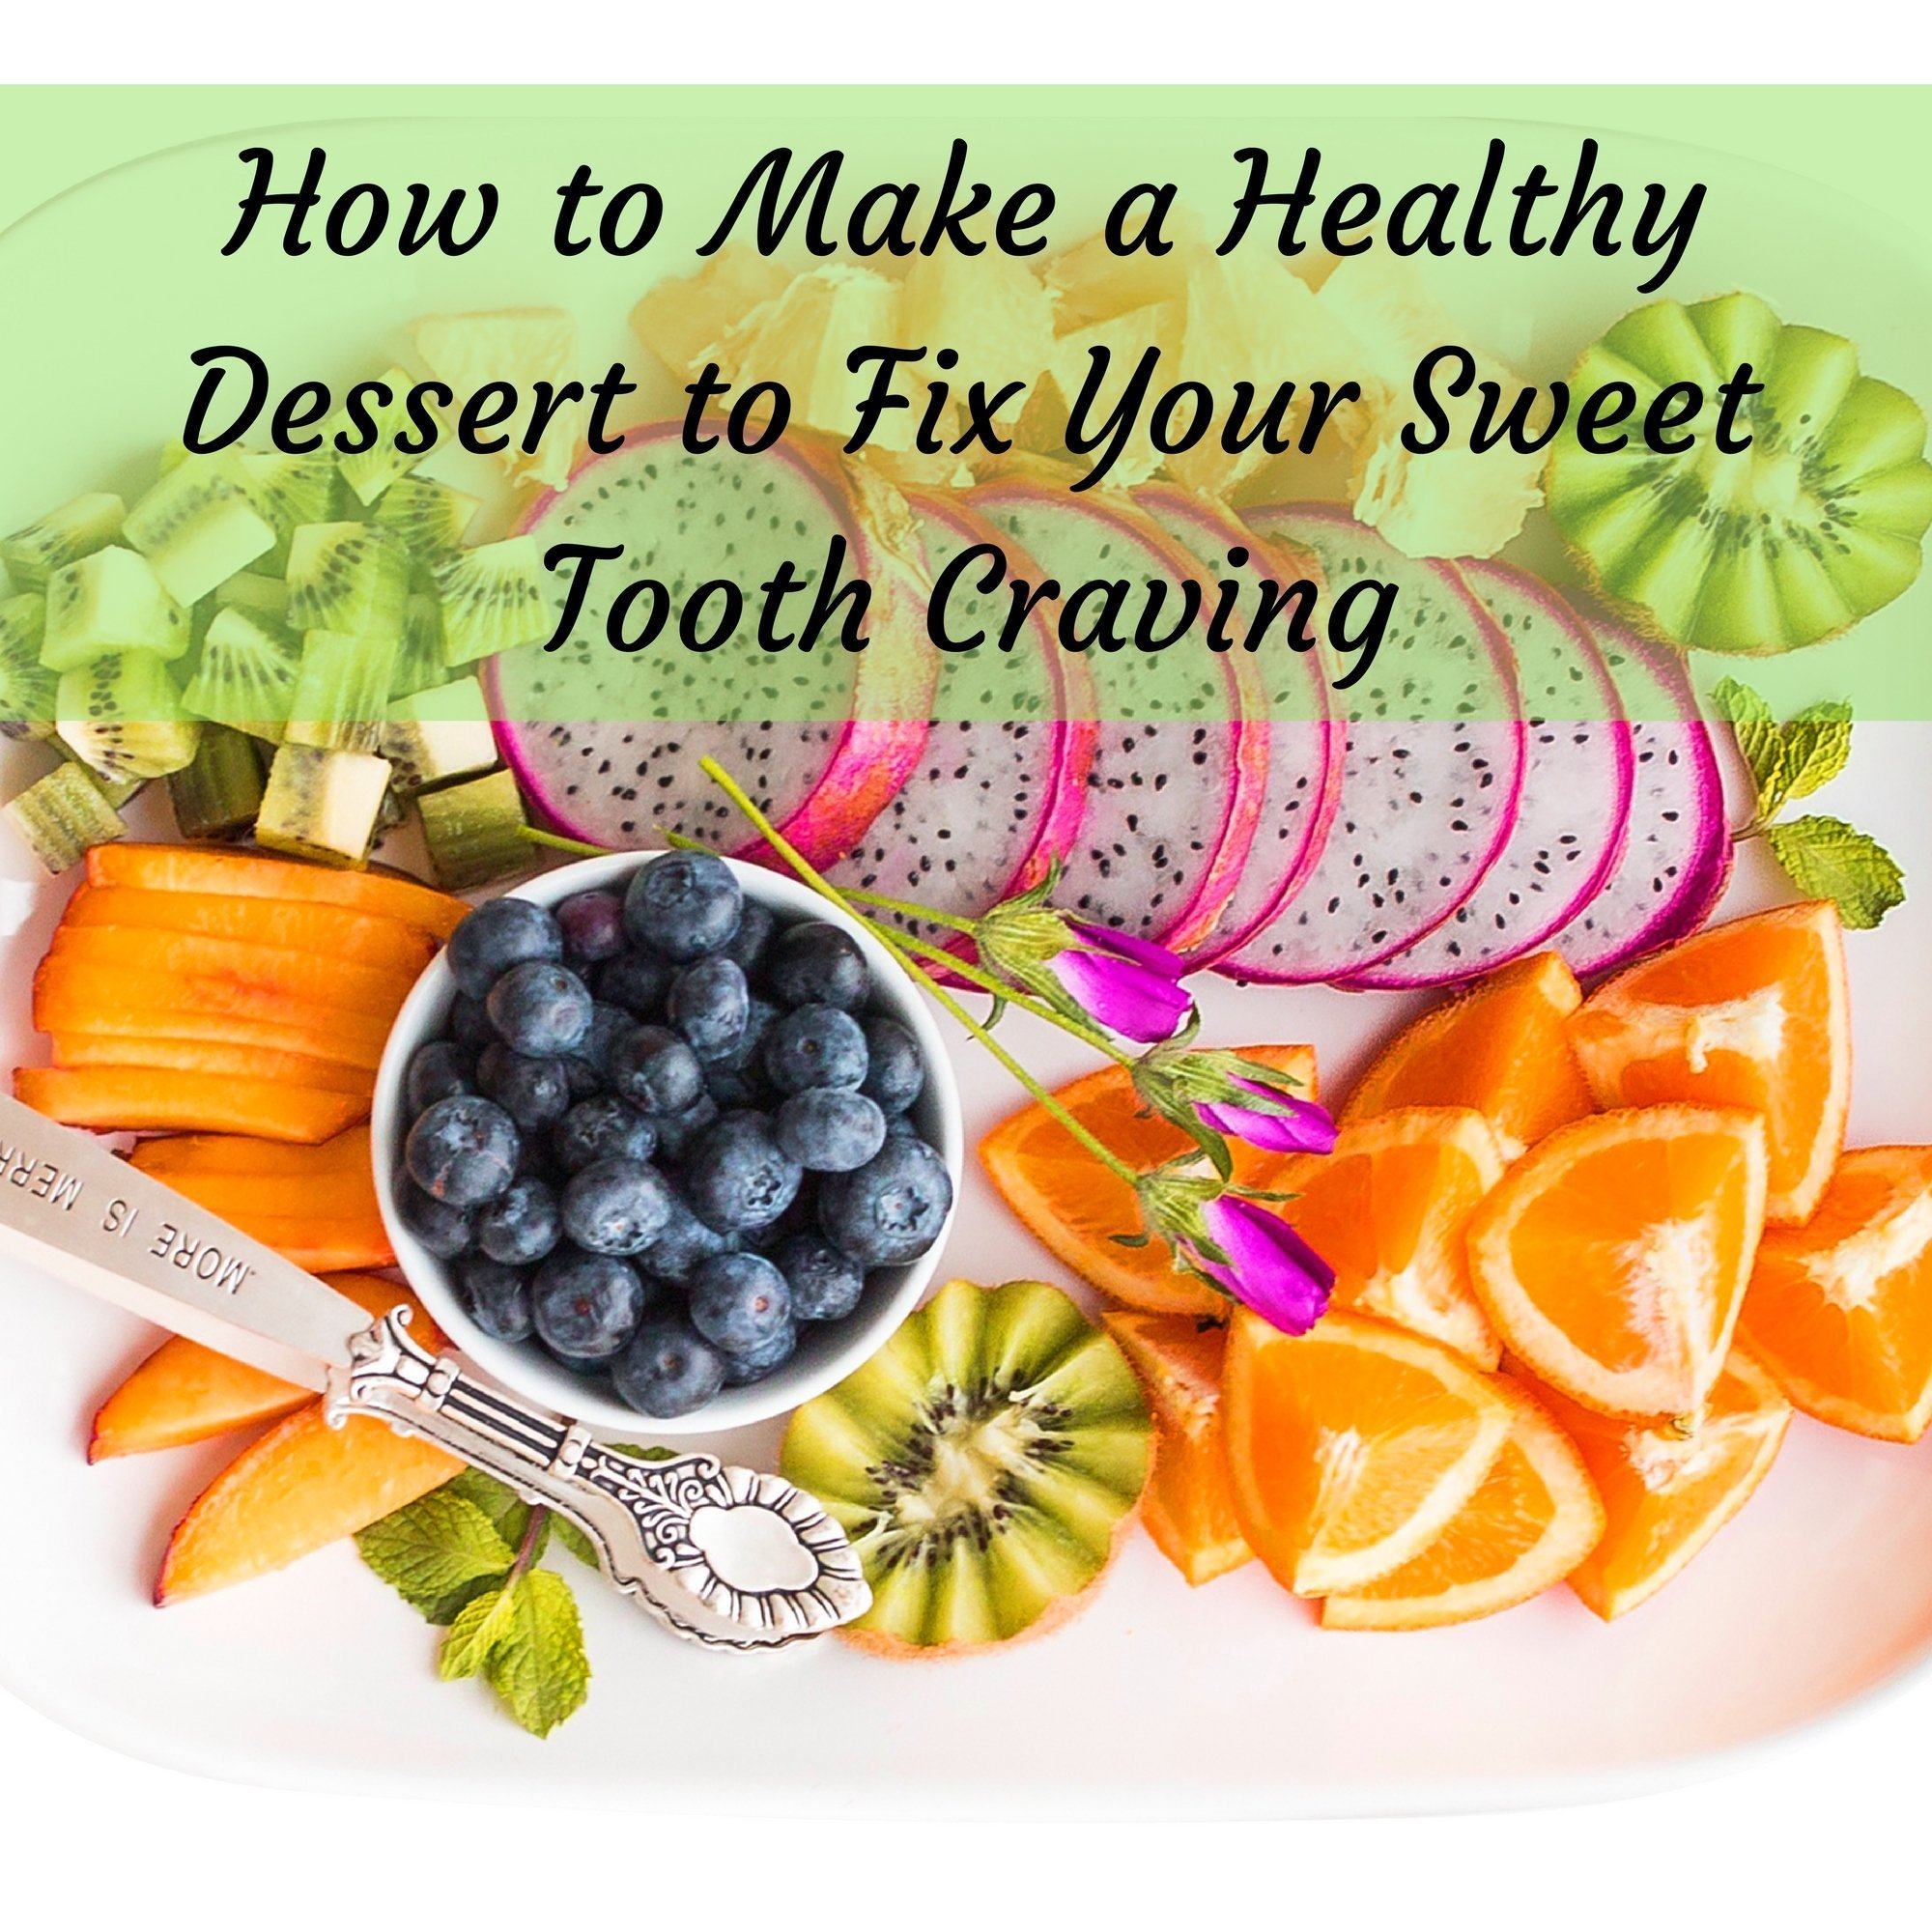 How to Make a Healthy Dessert to Fix Your Sweet Tooth Craving